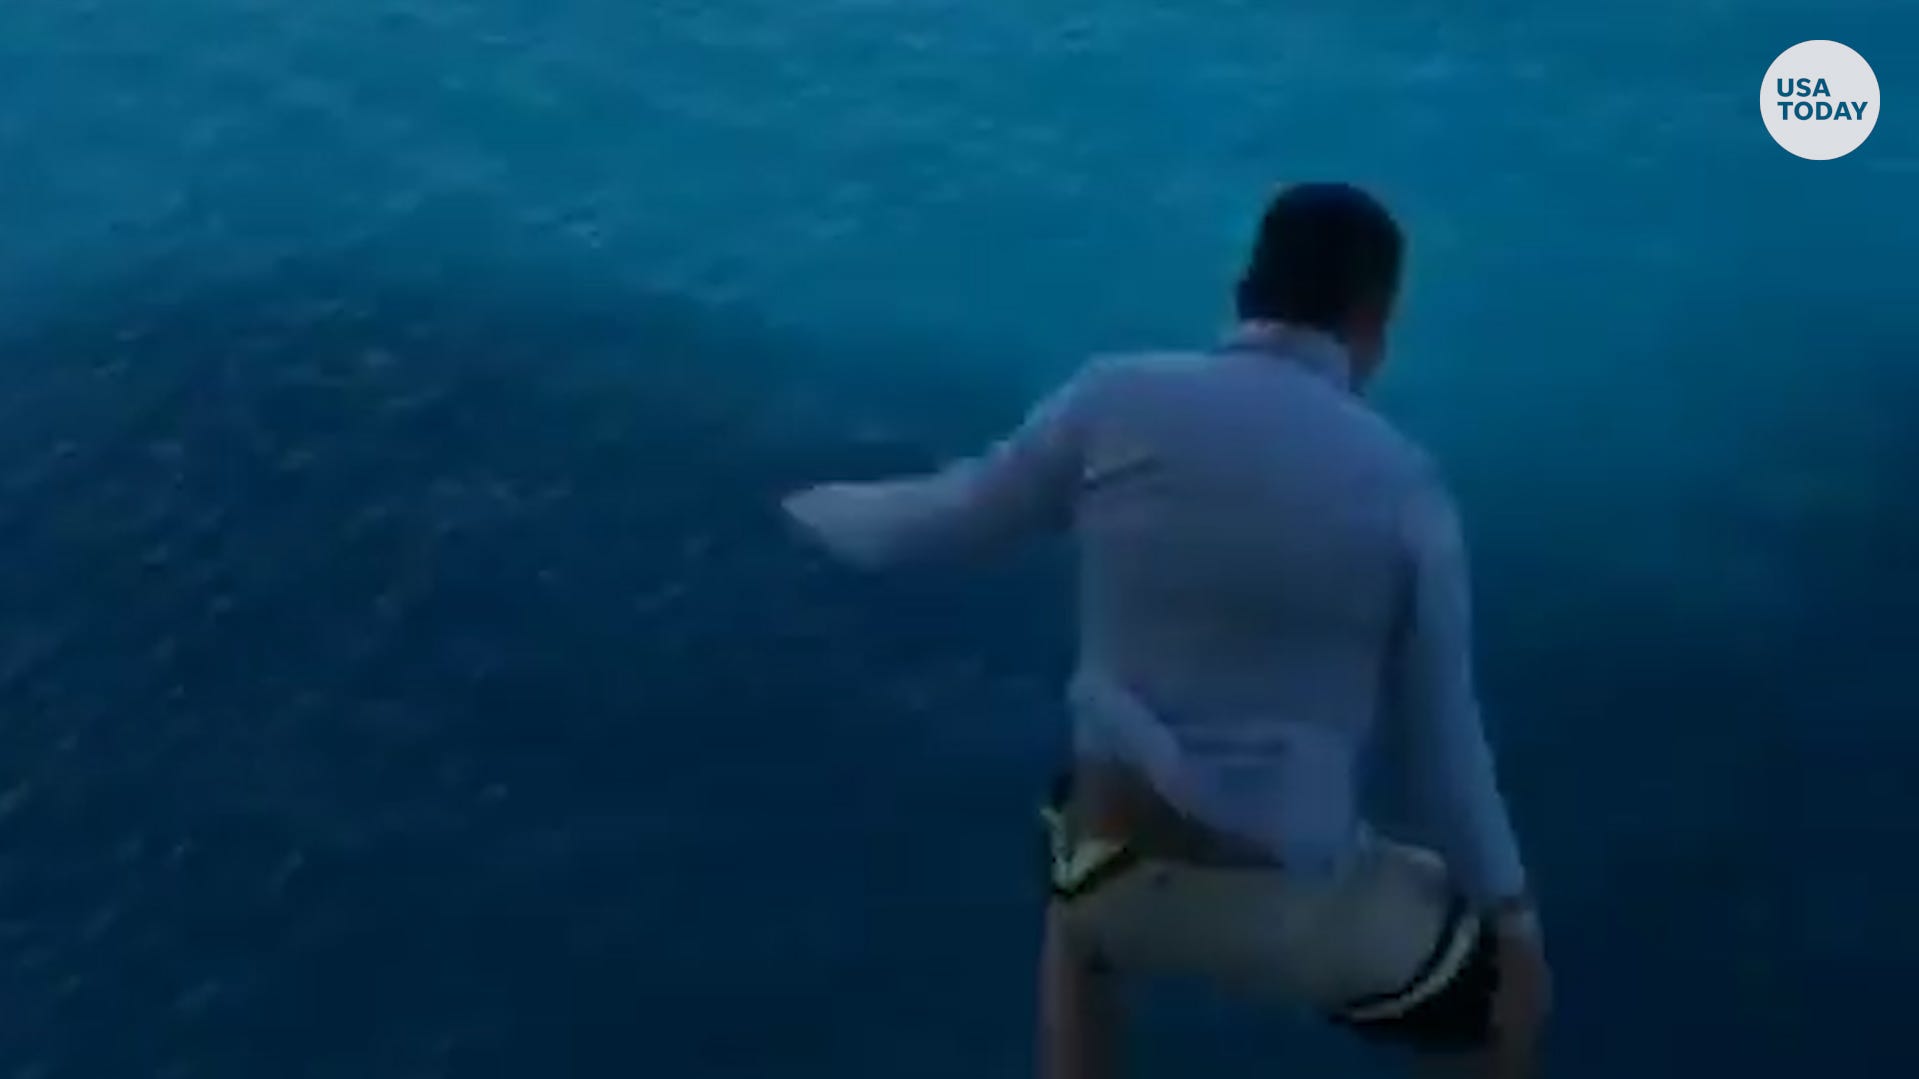 Man jumps from Royal Caribbean ship in stunt, gets banned for life